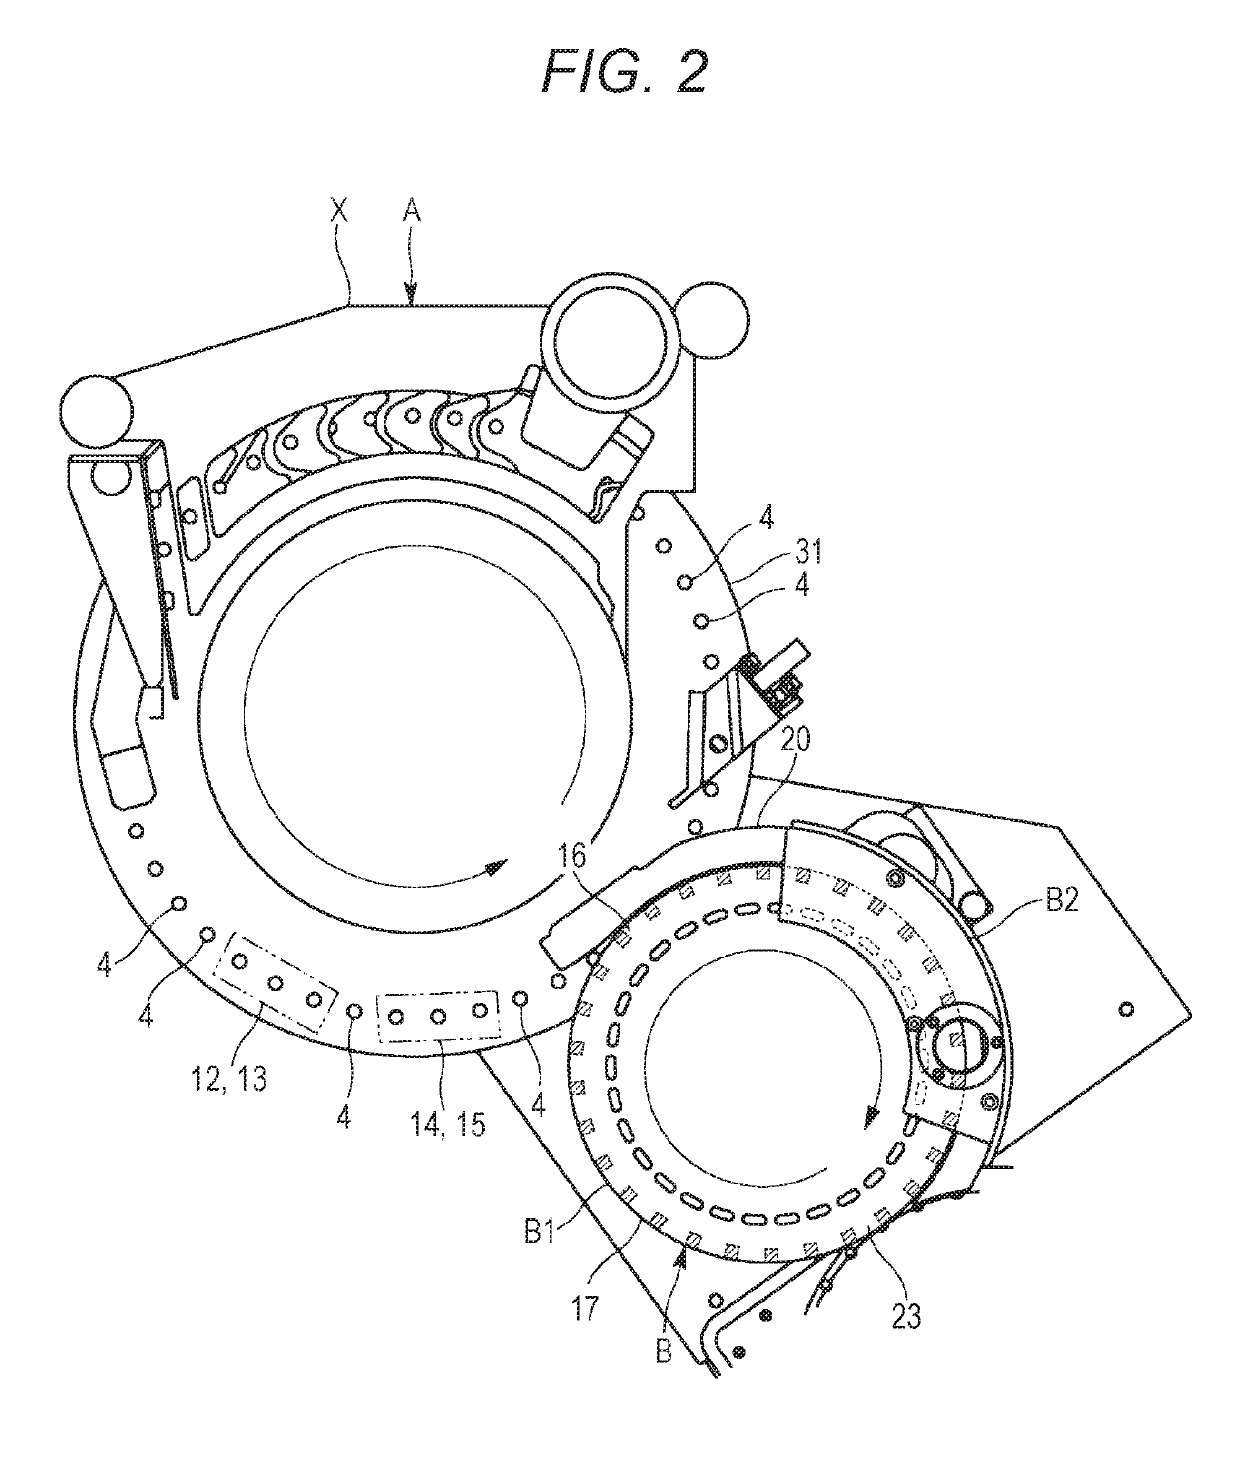 Molded product conveying device